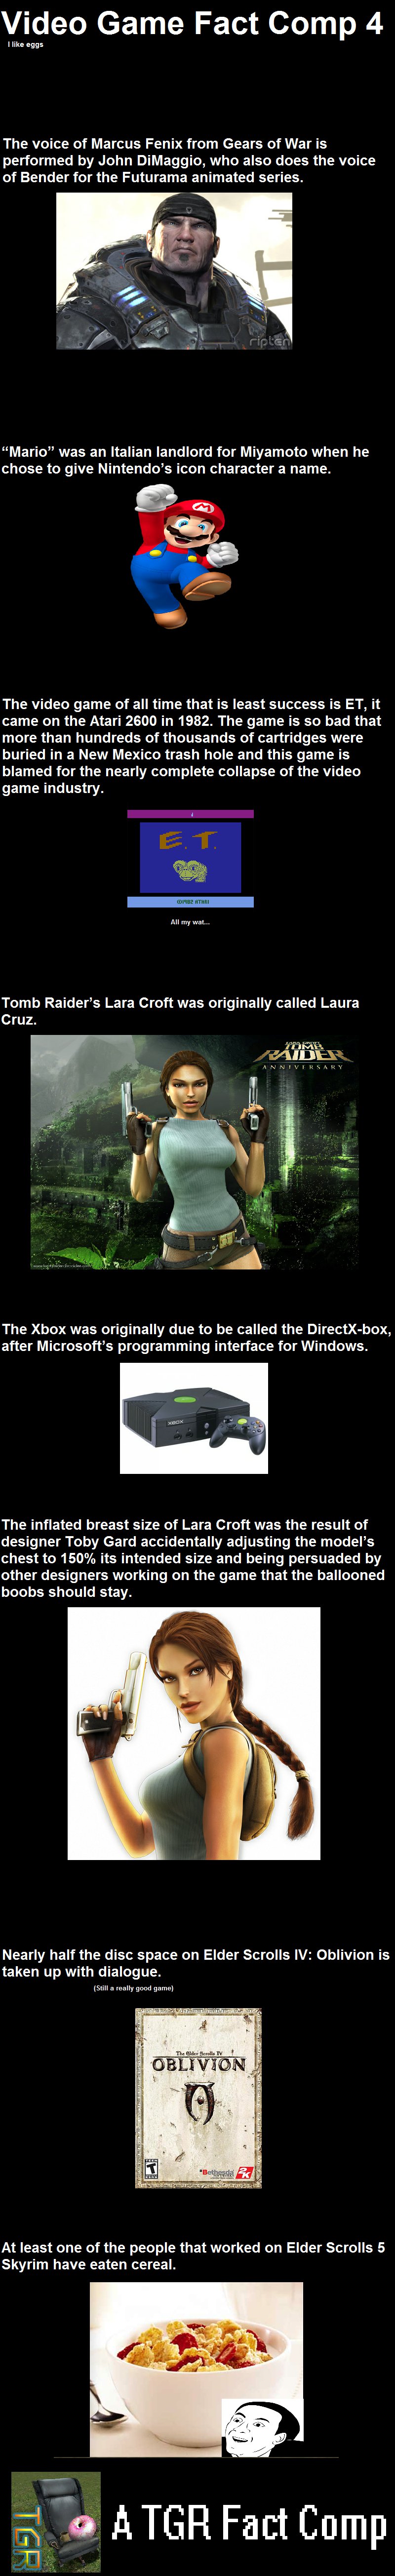 Video Game Fact Comp 4!